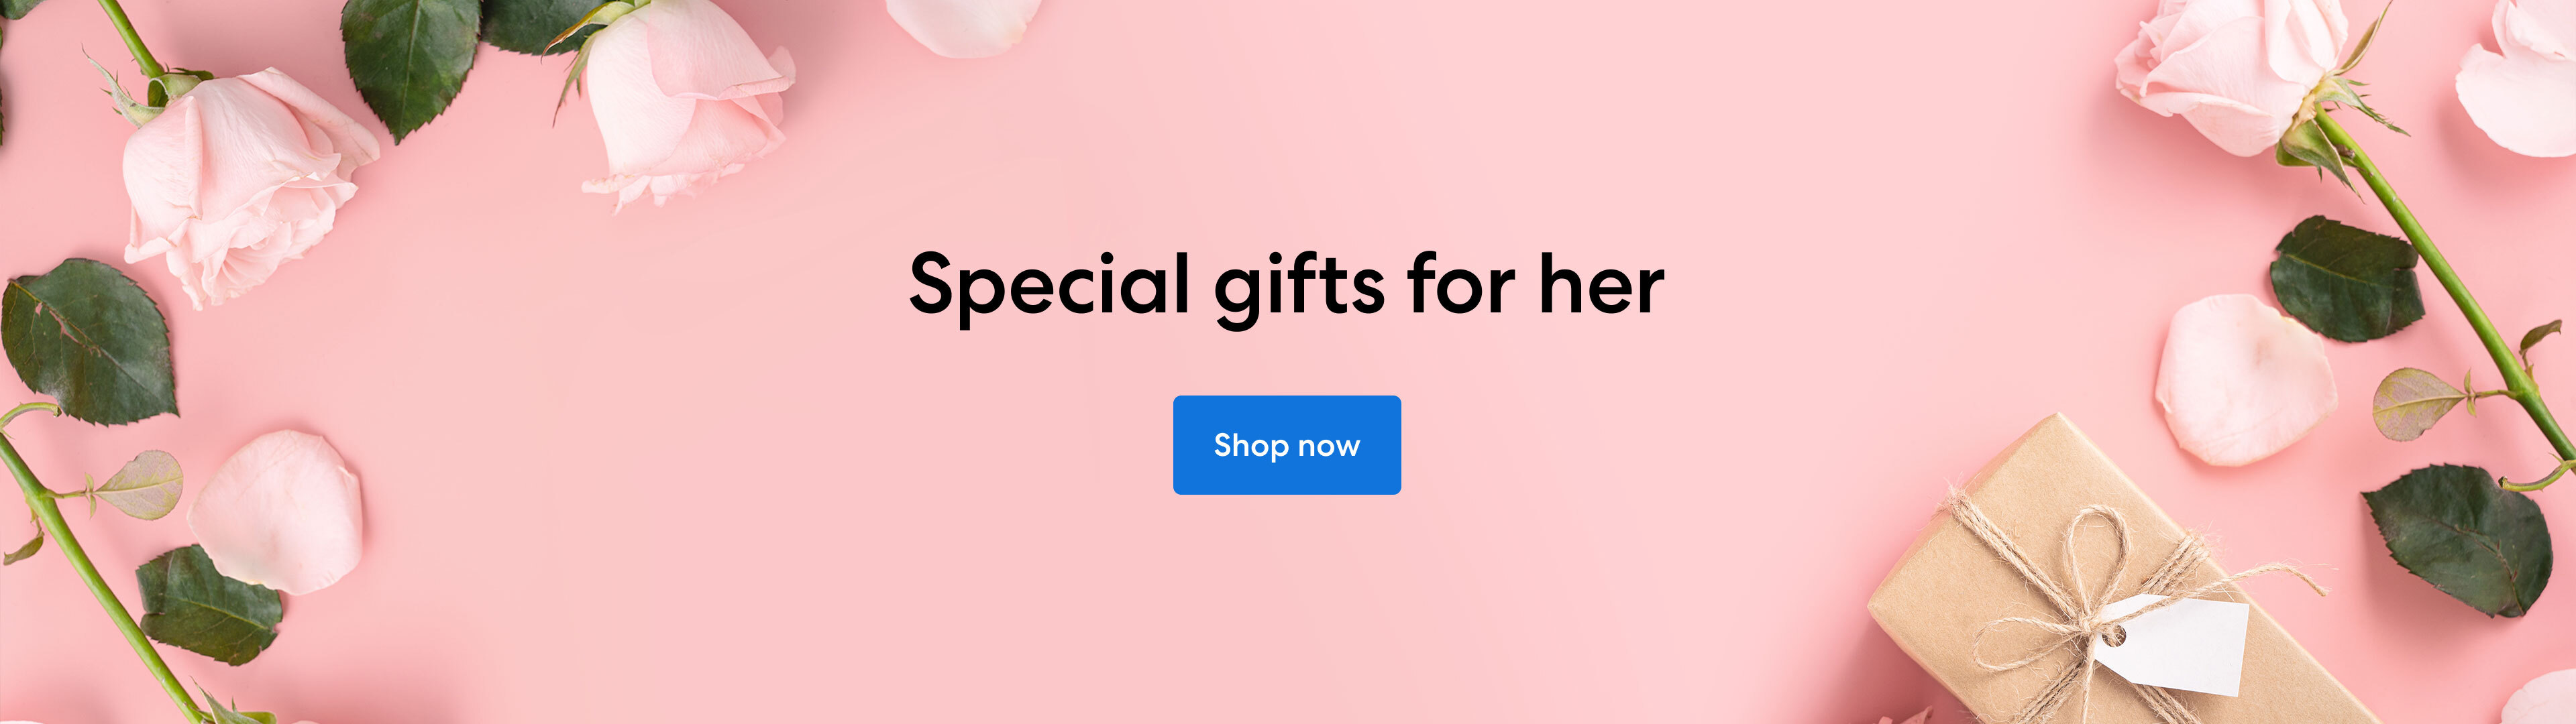 special gifts for her